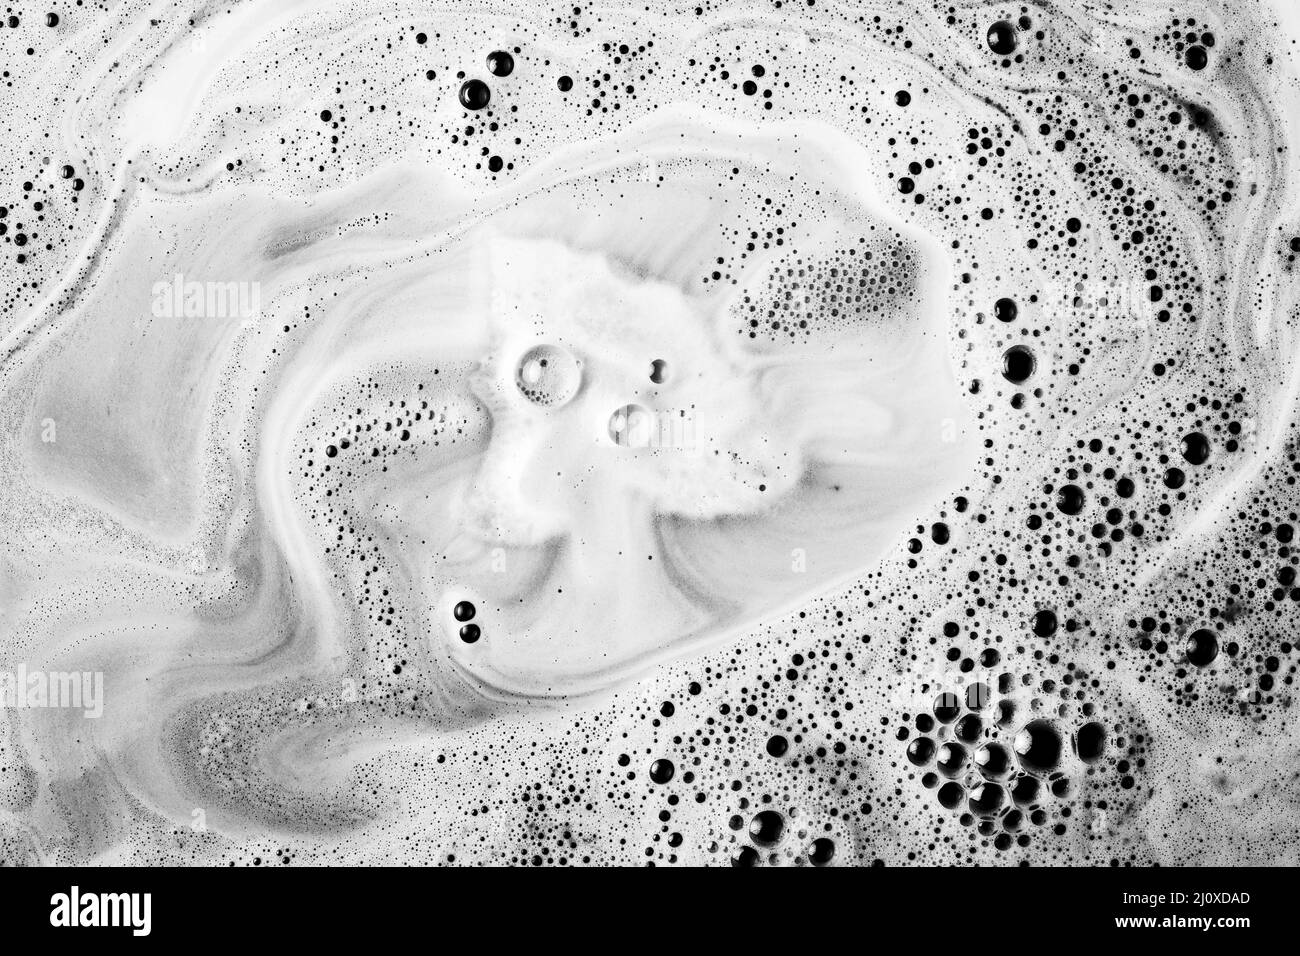 Dissolving bath bomb tub water with foam. High quality beautiful photo concept Stock Photo